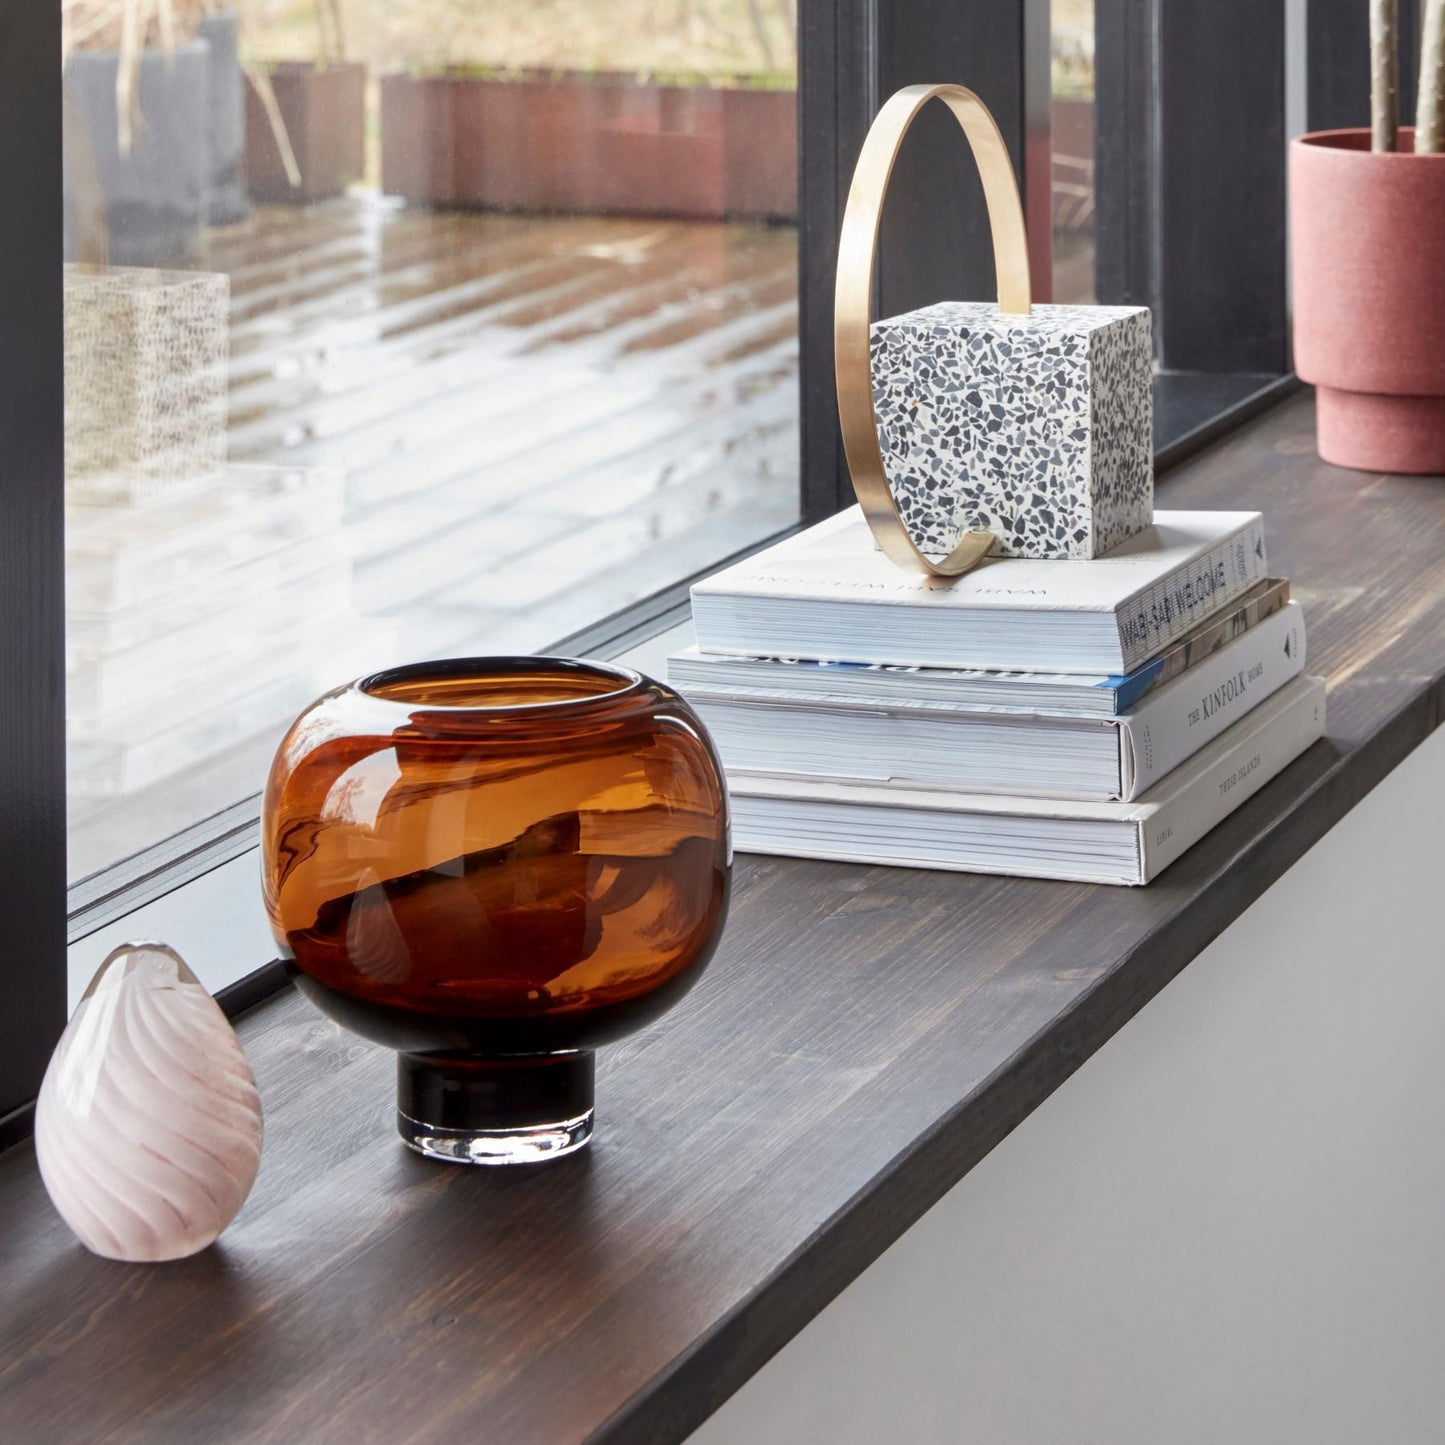 Hubsch Interior Nordic designer fish-bowl style cocoon vase in brown glass sitting inside on a window sill with some books